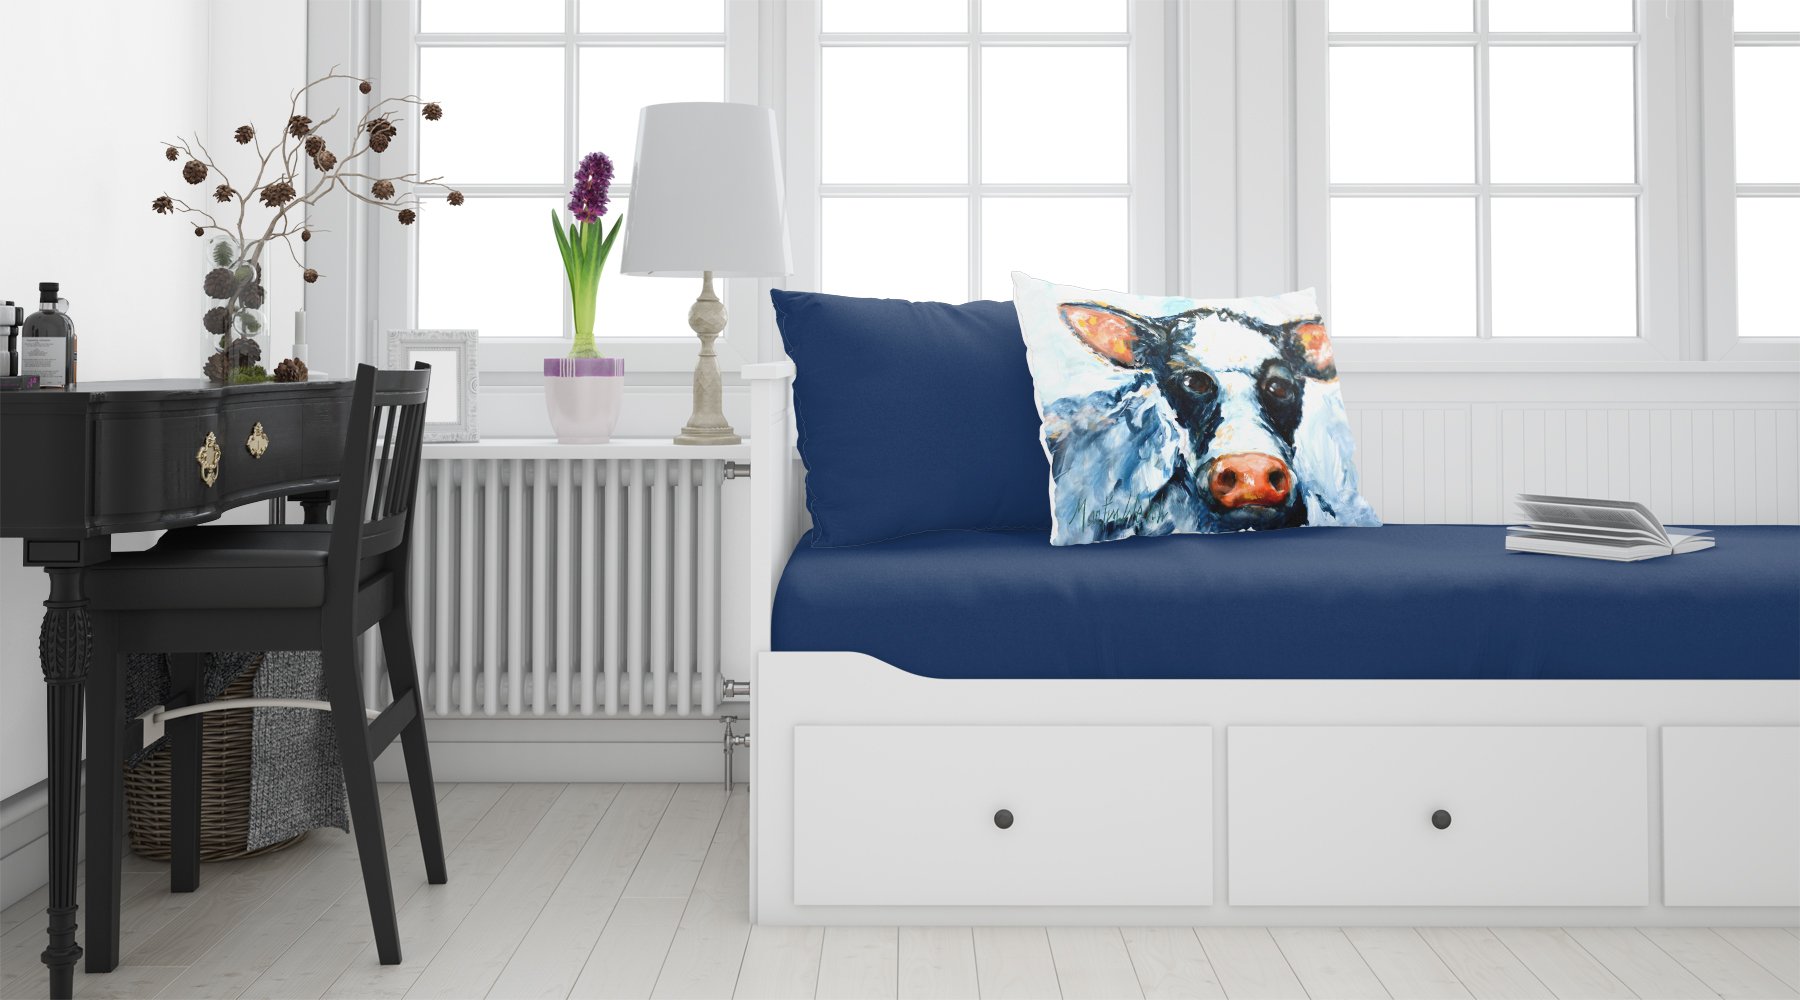 Cow Lick Black and White Cow Fabric Standard Pillowcase MW1273PILLOWCASE by Caroline's Treasures